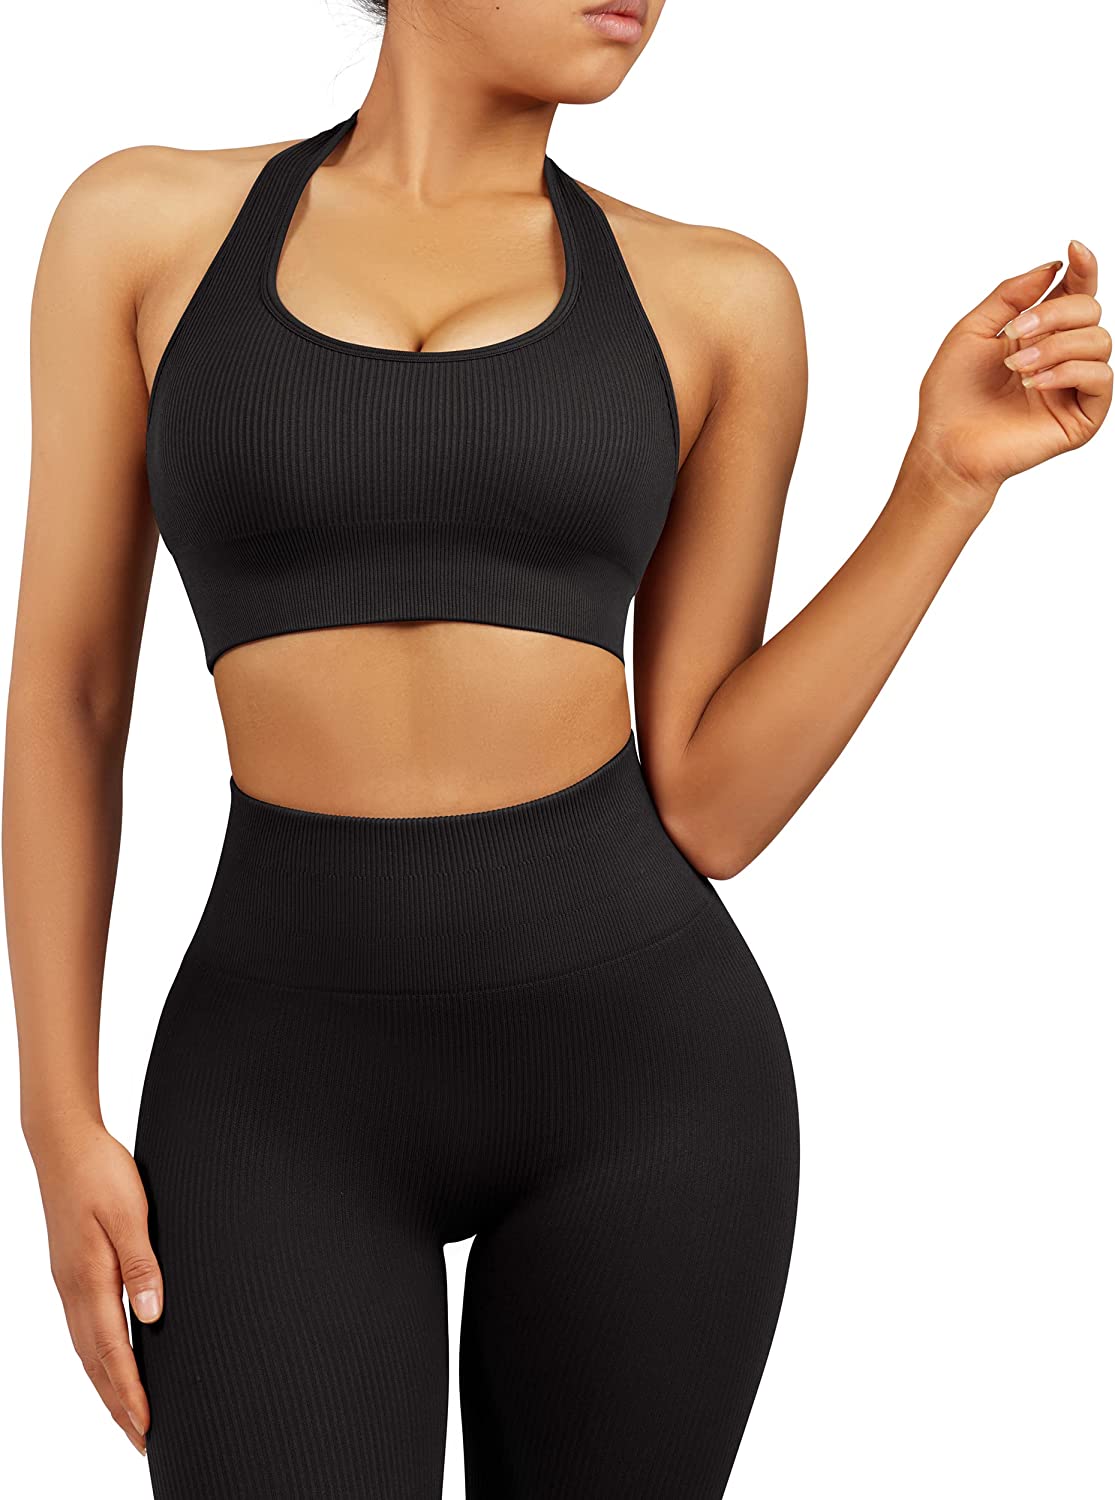 RUUHEE Workout Sets for Women Seamless 2 Piece Outfits Strap